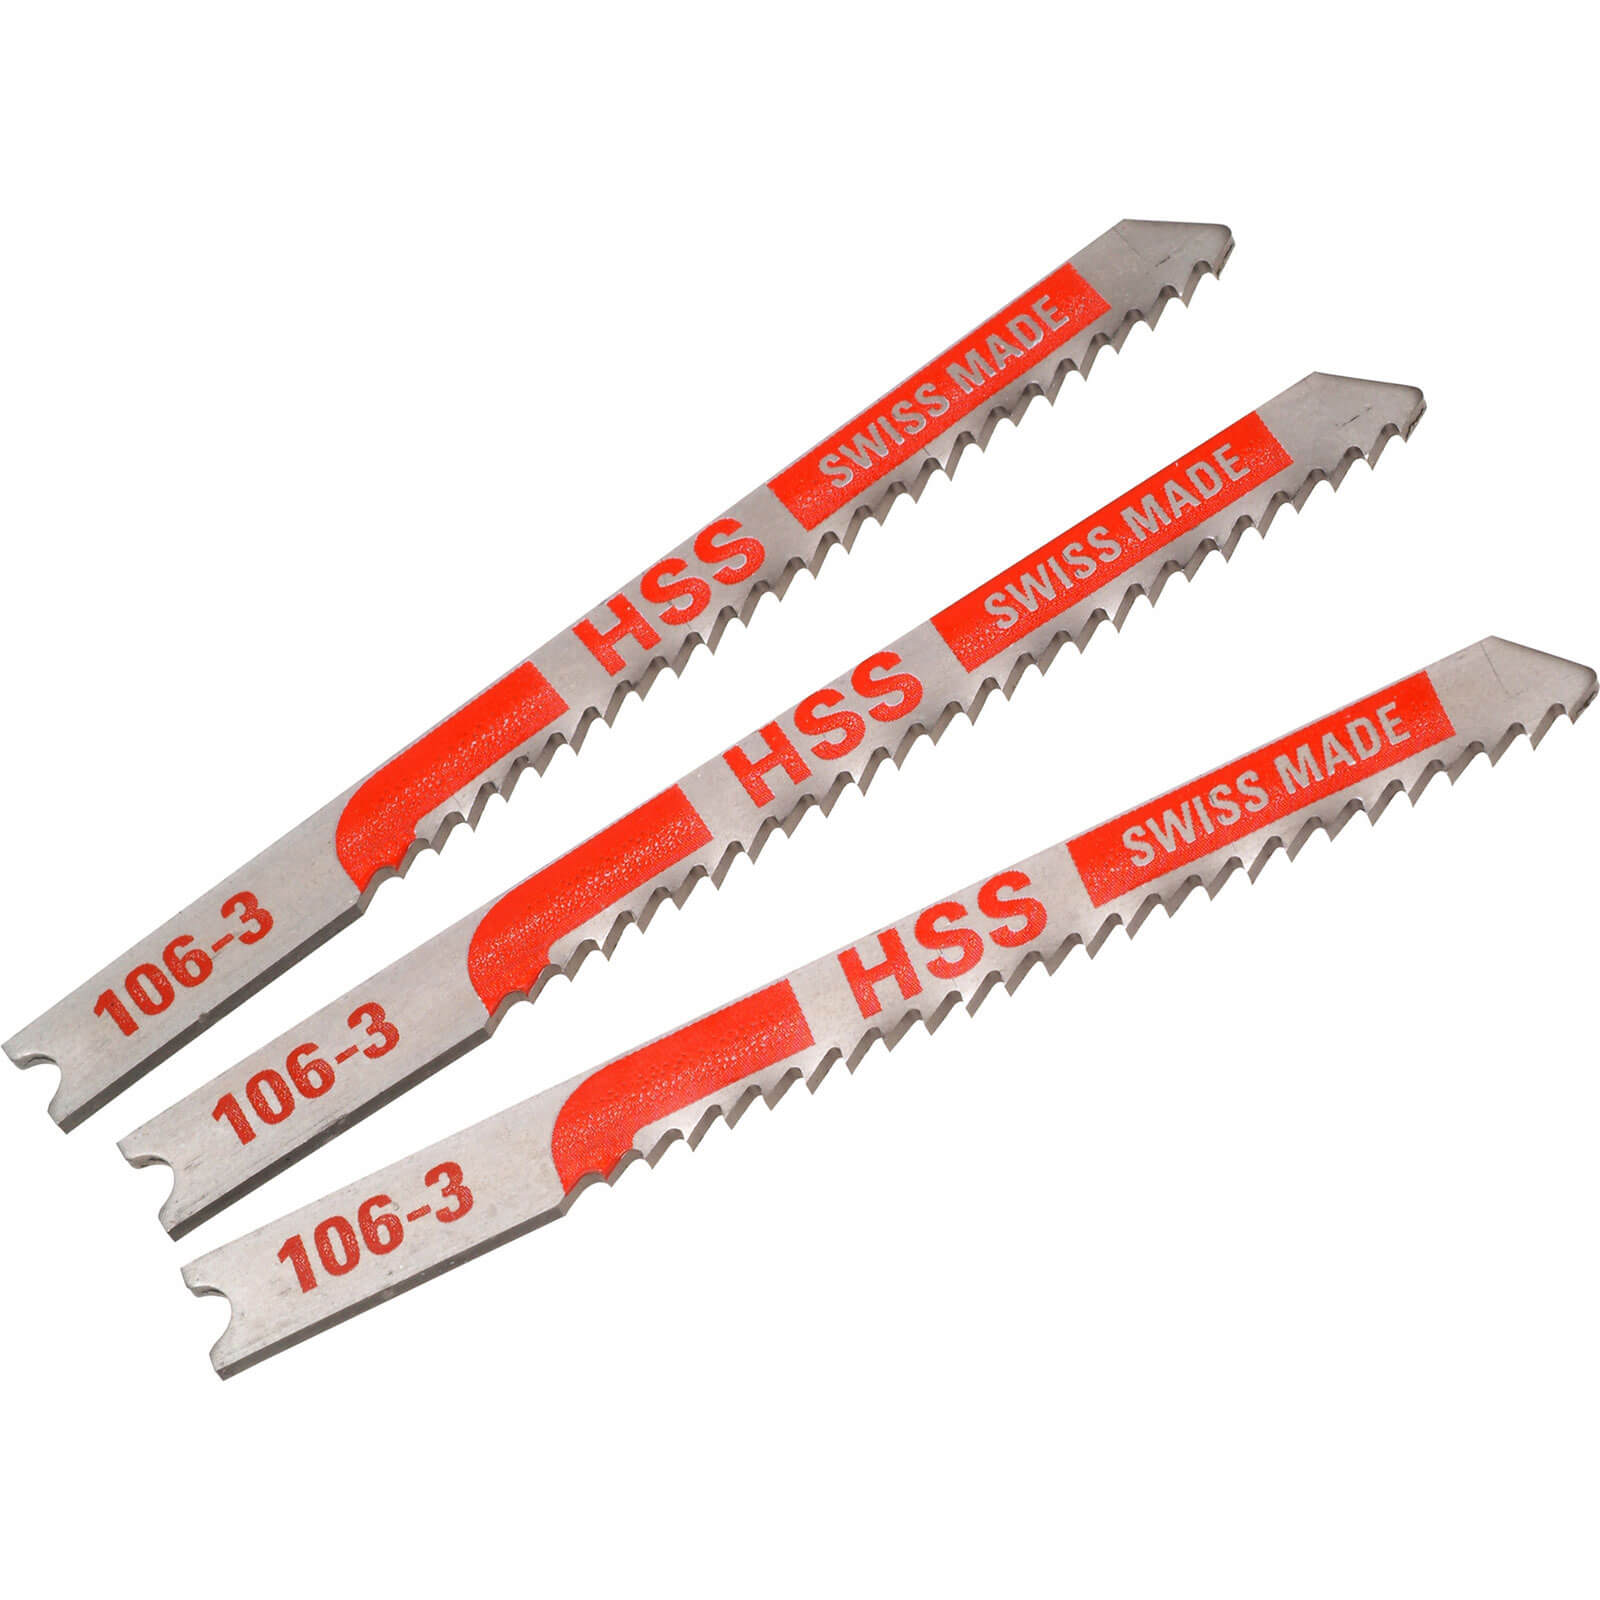 Click to view product details and reviews for Black And Decker X22003 Piranha Metal Hss U Shank Jigsaw Blades Pack Of 3.